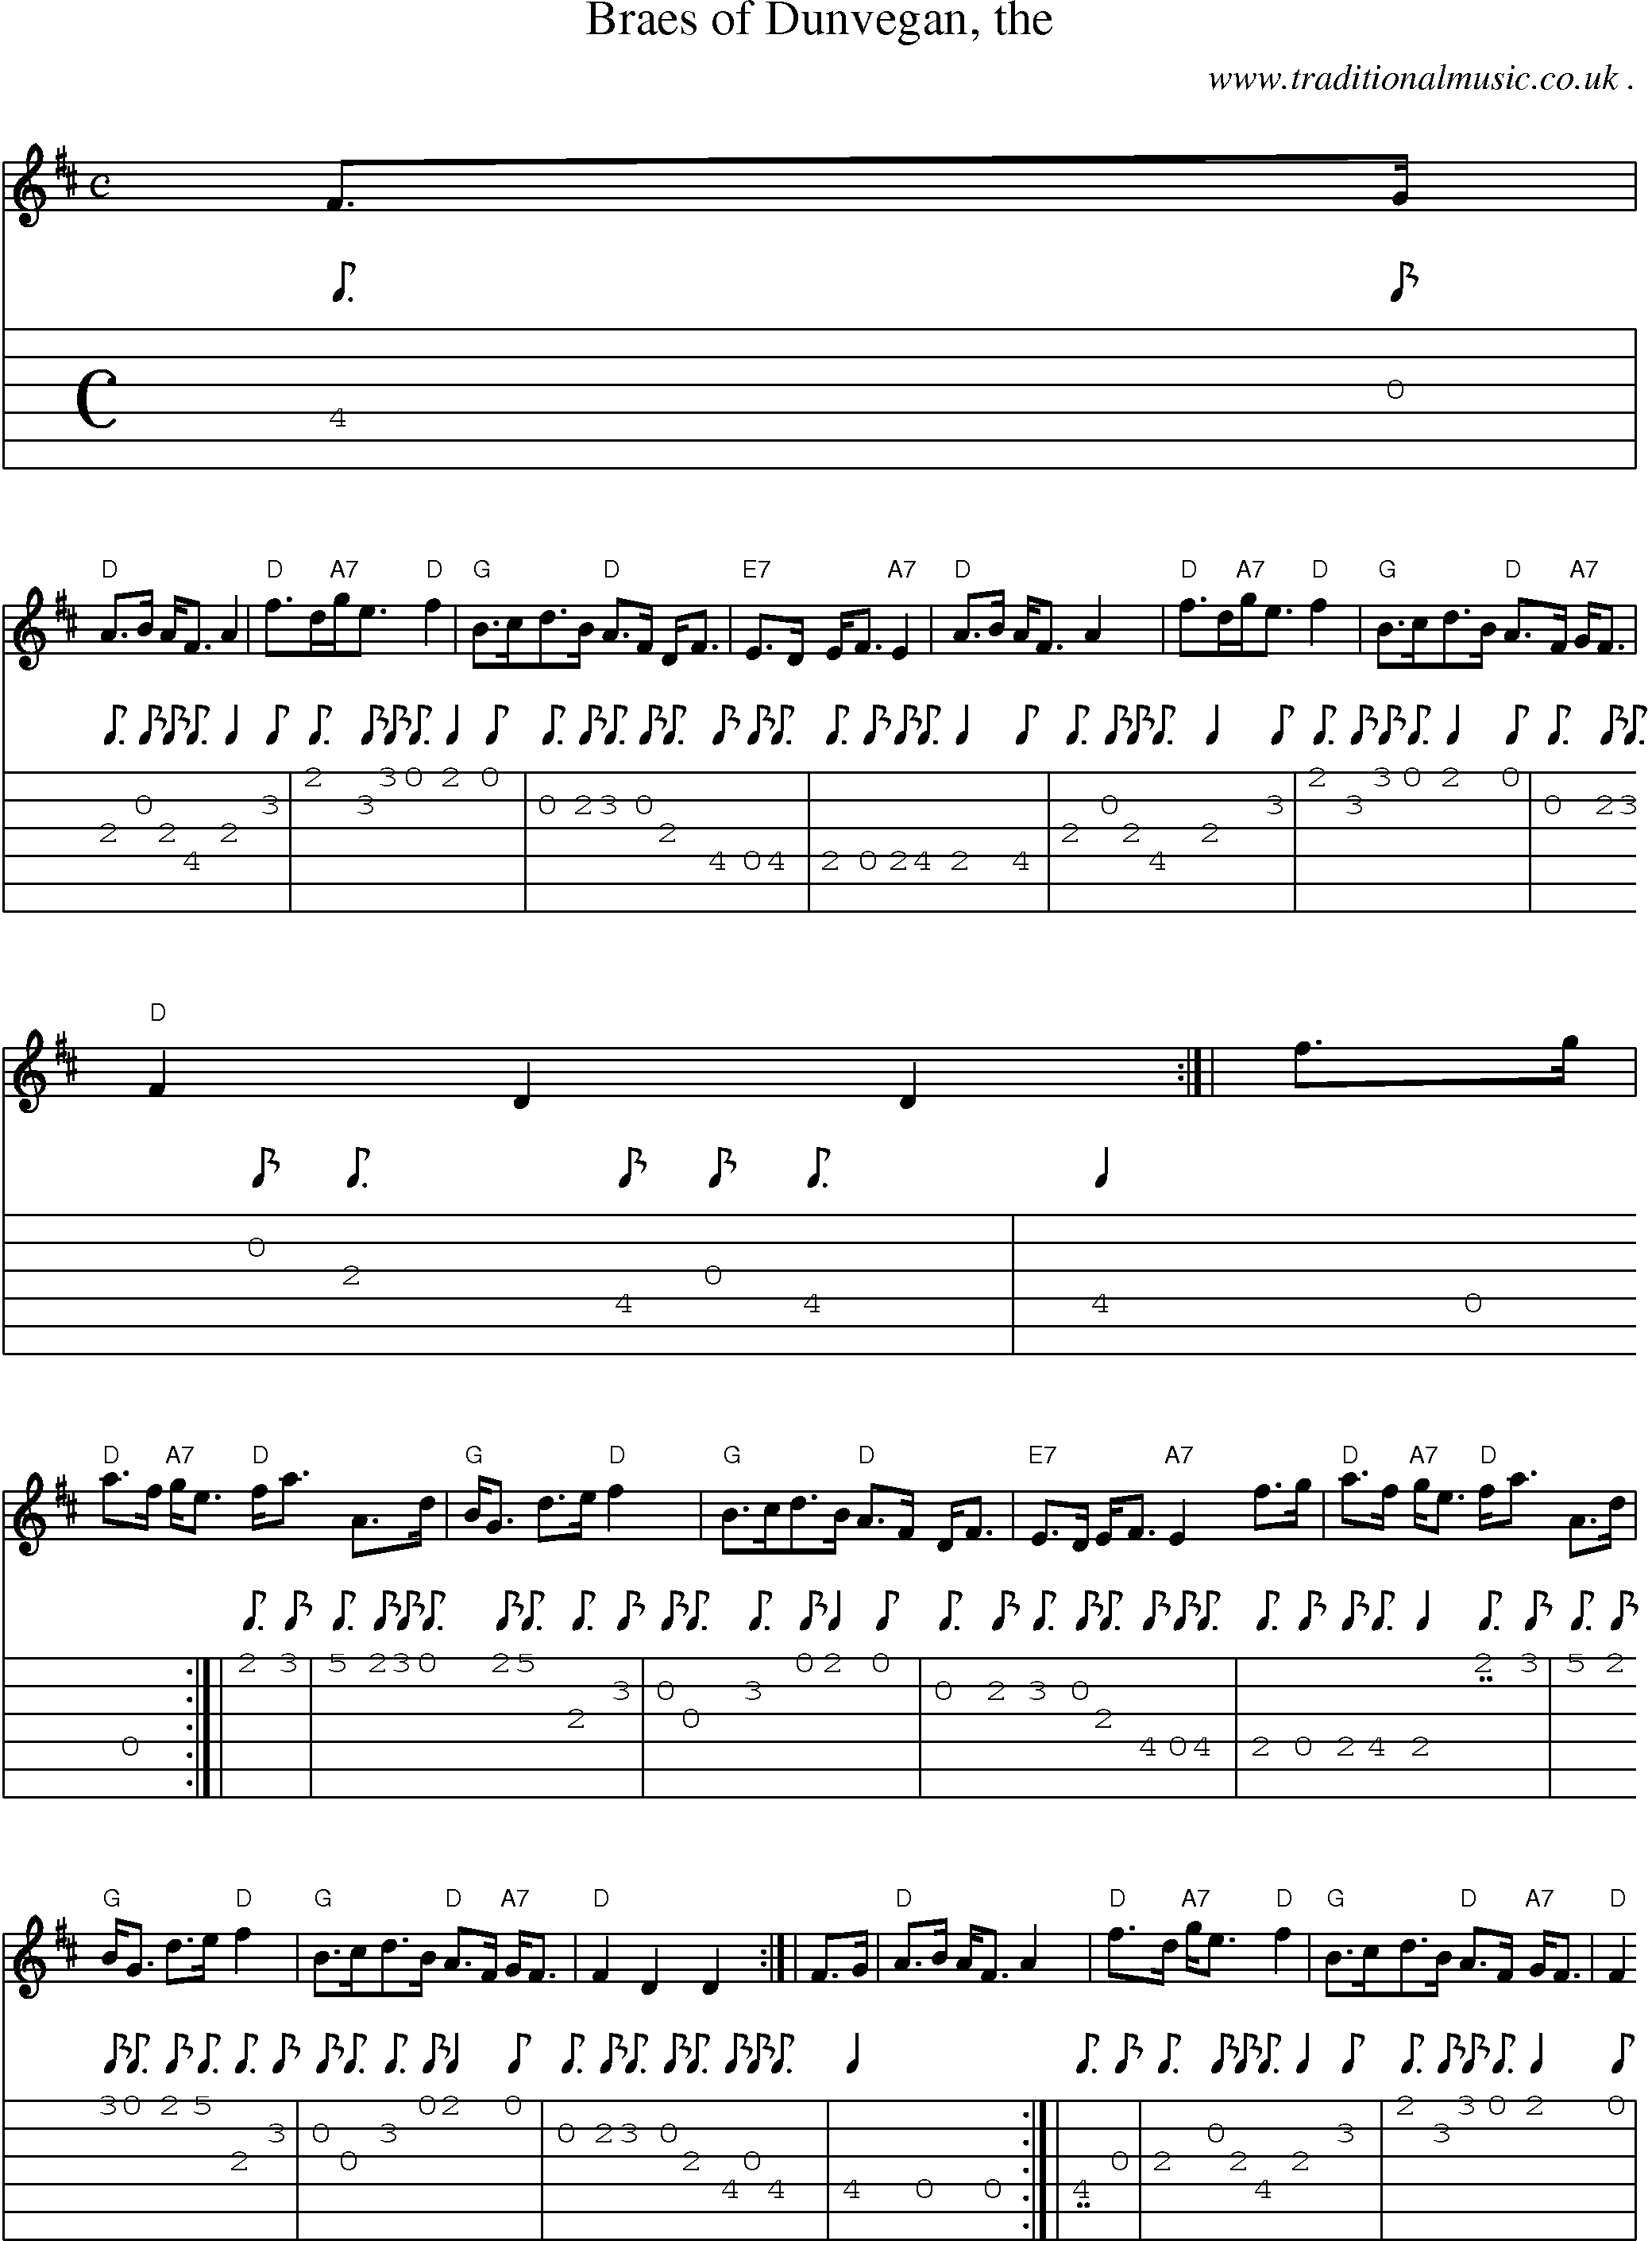 Sheet-music  score, Chords and Guitar Tabs for Braes Of Dunvegan The